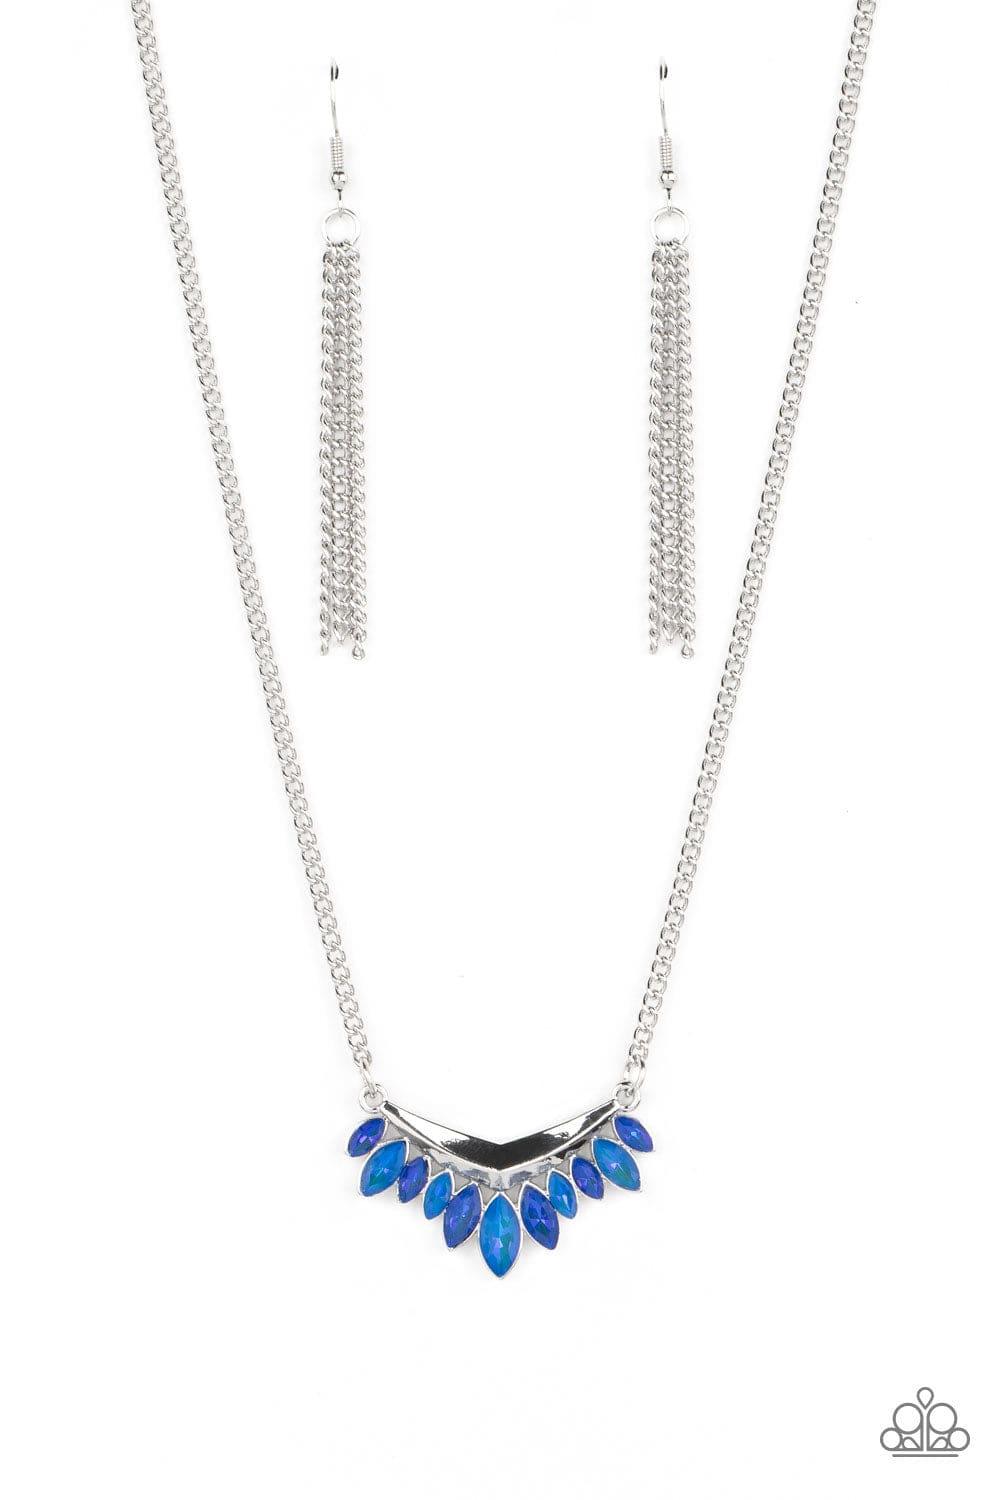 Paparazzi Accessories - Flash Of Fringe - Blue Necklace - Bling by JessieK